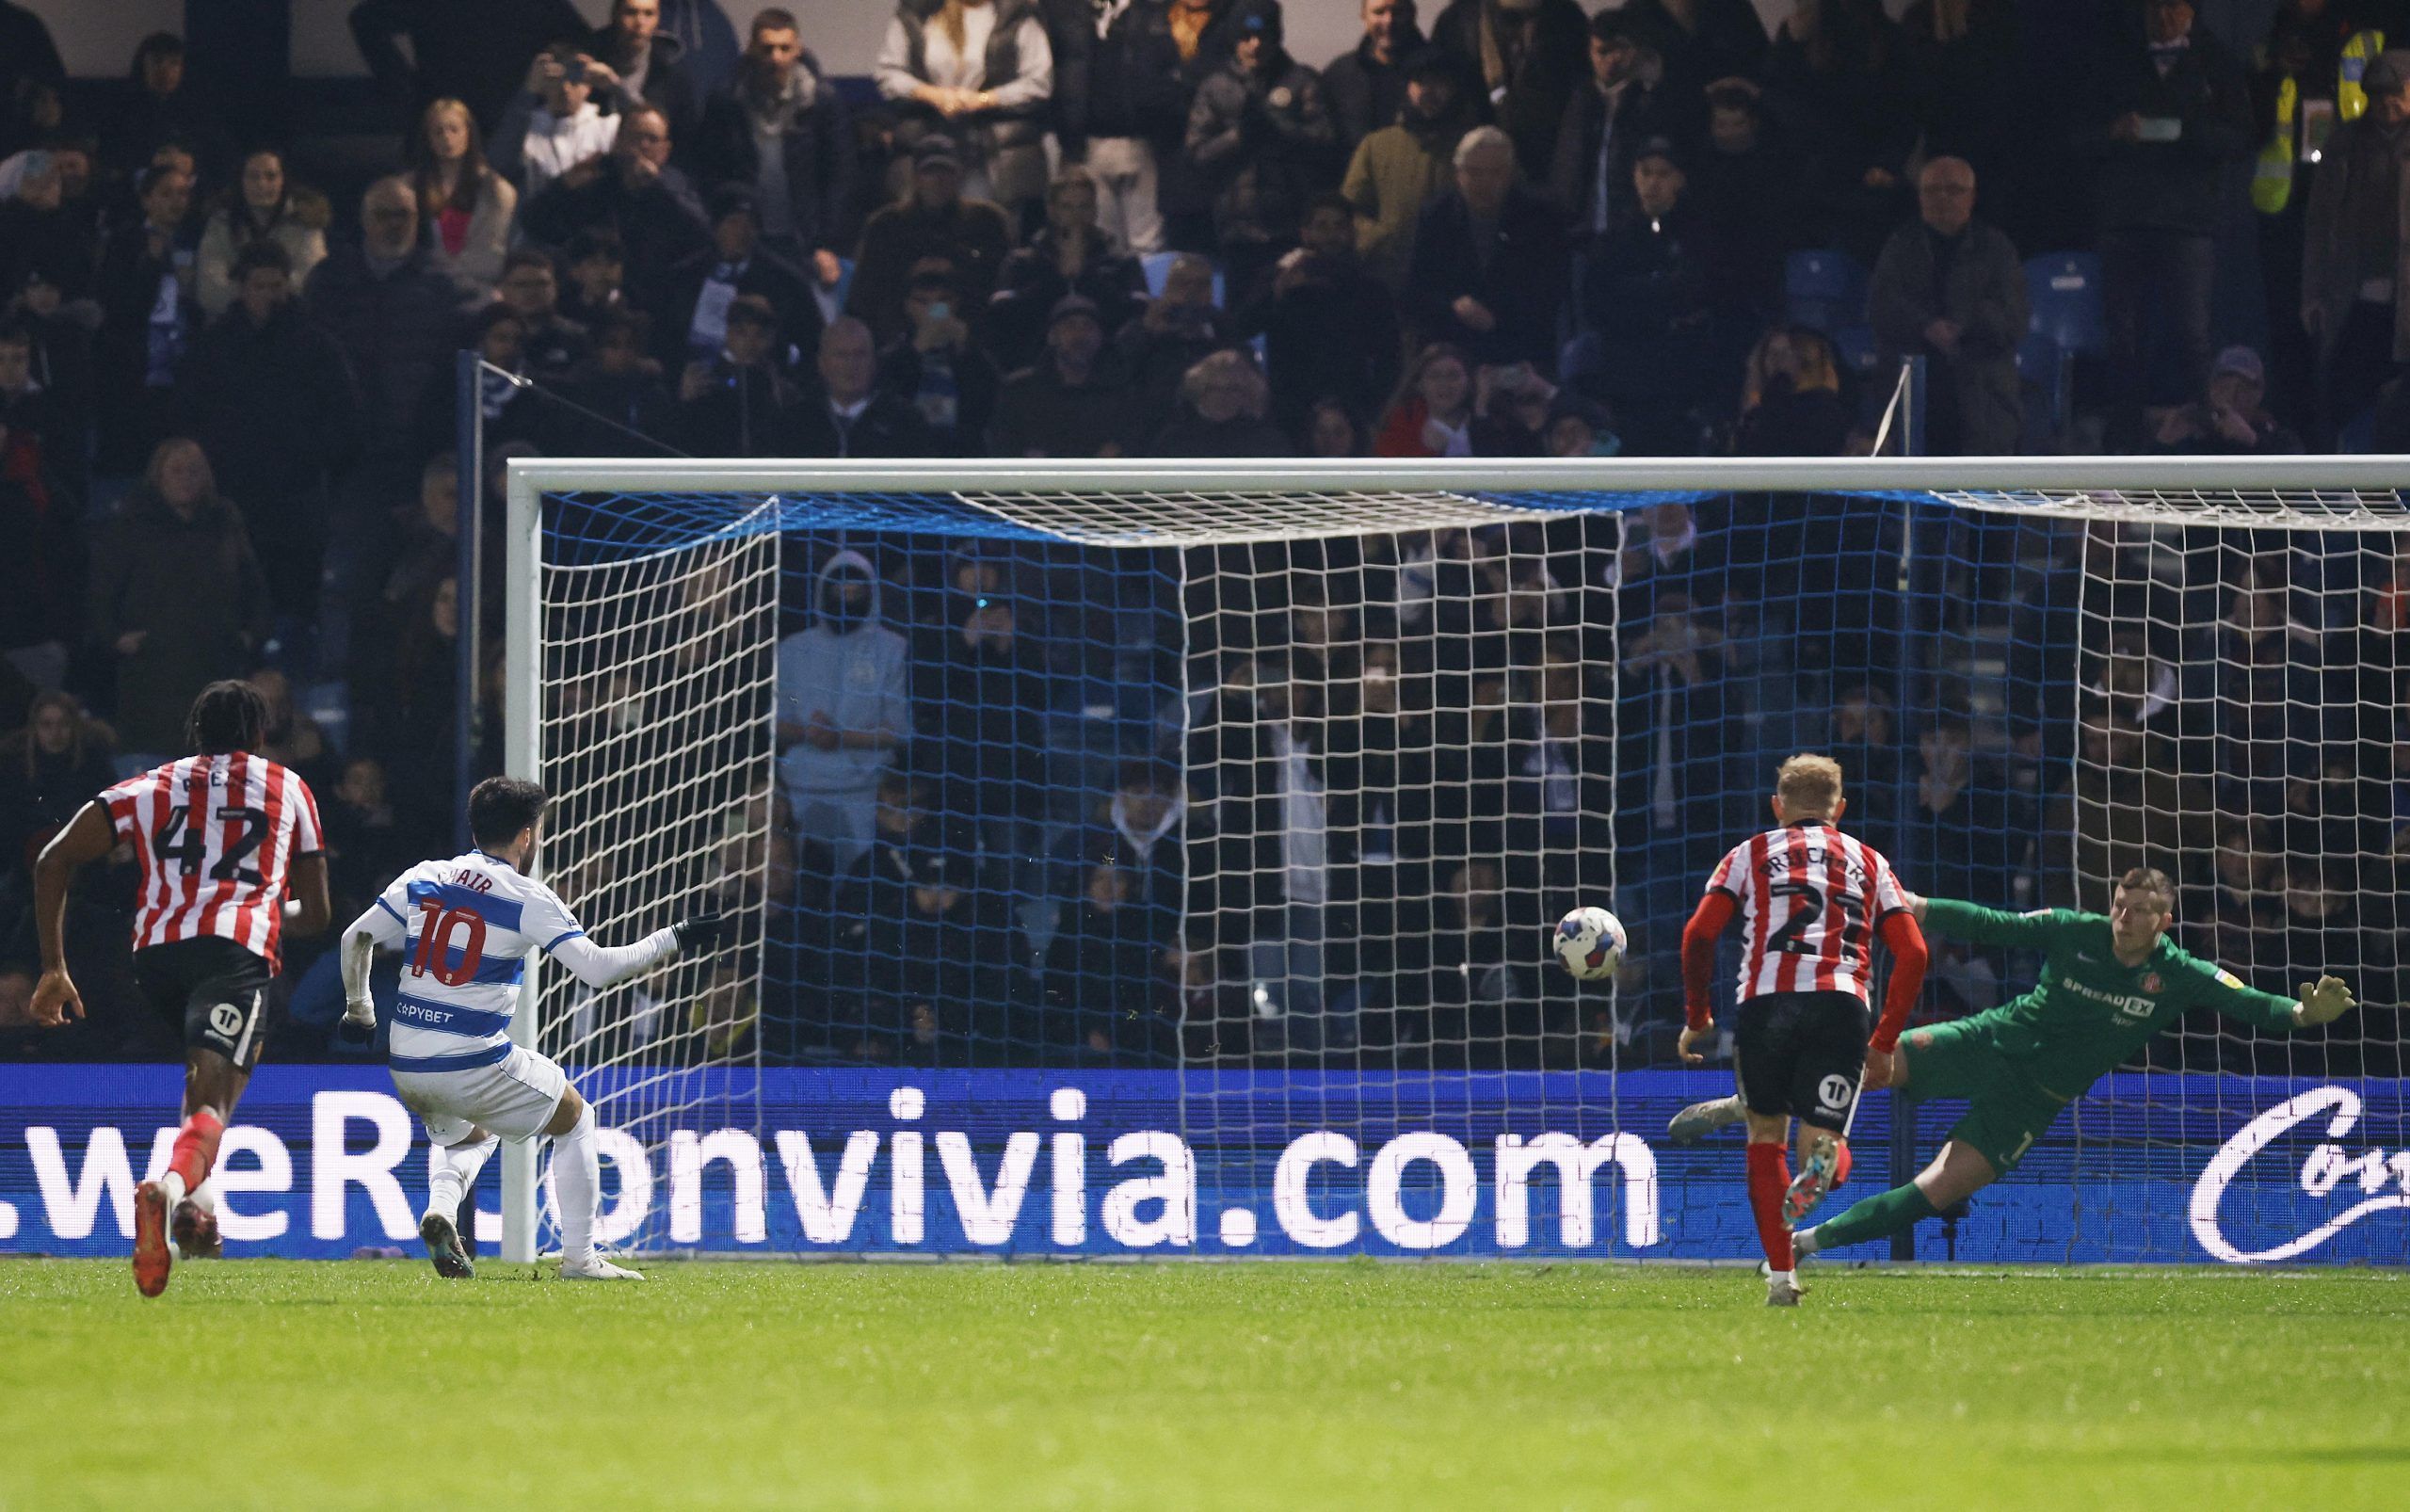 Soccer Football - Championship - Queens Park Rangers v Sunderland - Loftus Road, London, Britain - February 14, 2023 Sunderland's Anthony Patterson saves the penalty of Queens Park Rangers' Ilias Chair Action Images/Andrew Couldridge EDITORIAL USE ONLY. No use with unauthorized audio, video, data, fixture lists, club/league logos or 'live' services. Online in-match use limited to 75 images, no video emulation. No use in betting, games or single club /league/player publications.  Please contact y